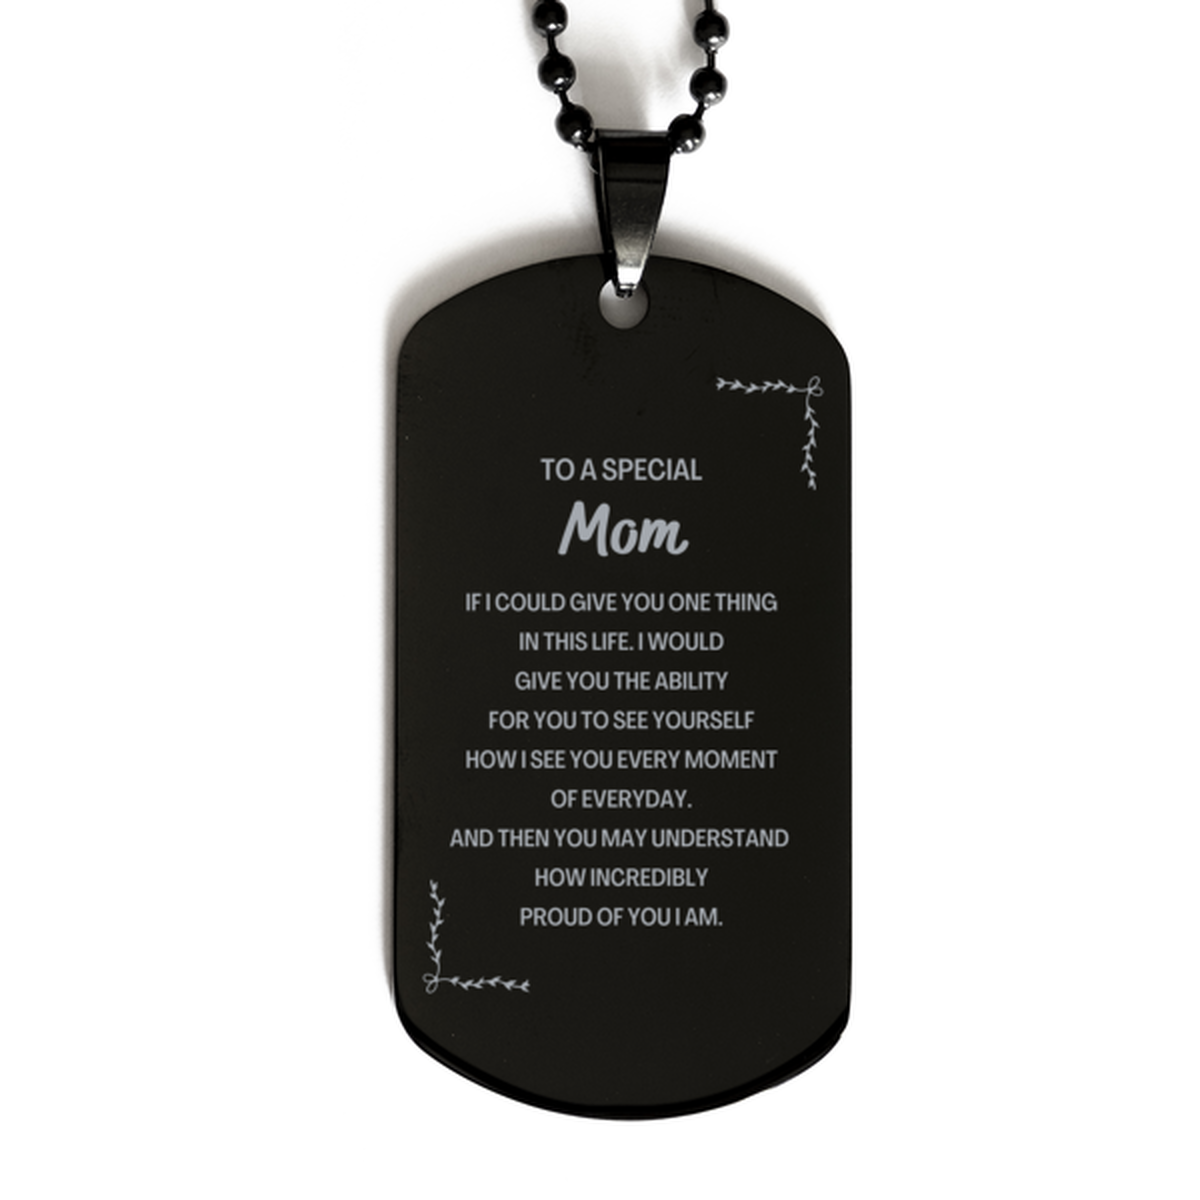 To My Mom Black Dog Tag, Gifts For Mom Engraved, Inspirational Gifts for Christmas Birthday, Epic Gifts for Mom To A Special Mom how incredibly proud of you I am